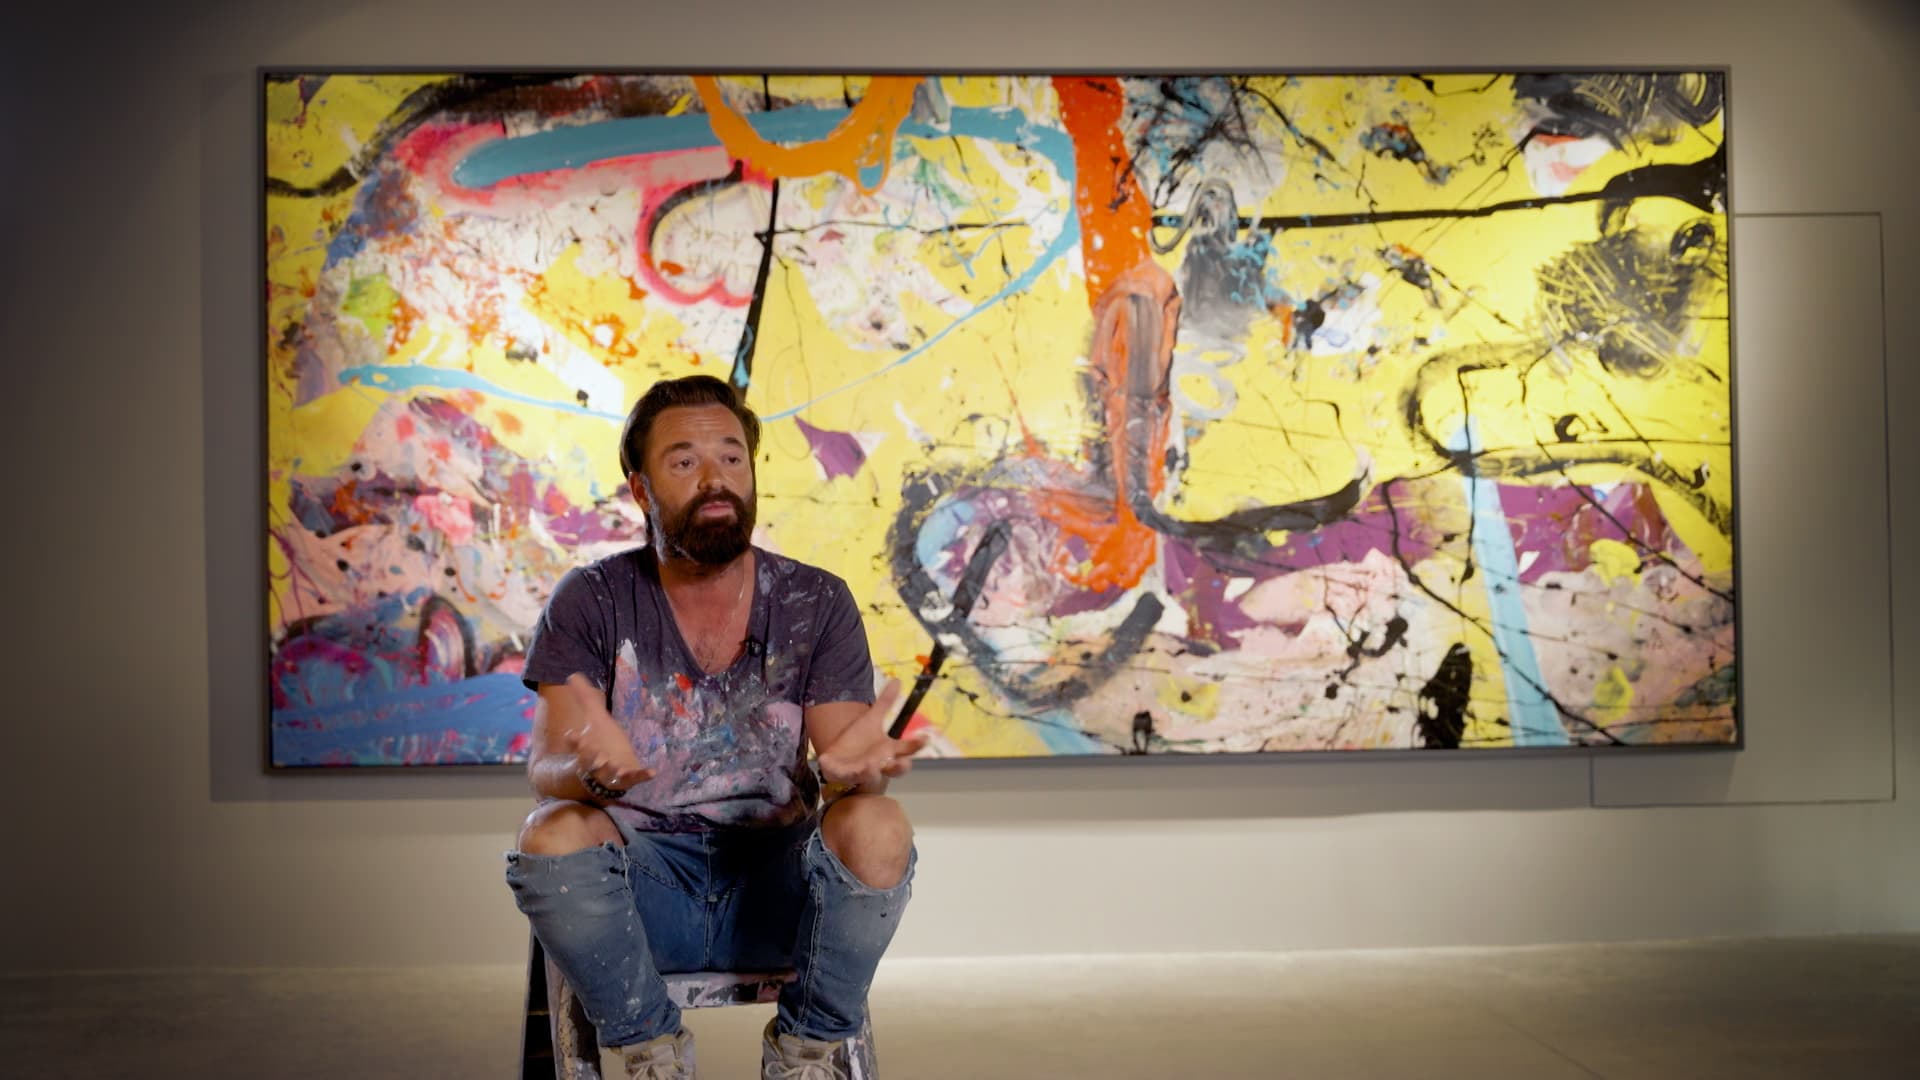 Meet the Dubai artist whose work has sold for millions — and turns down 99% of prospective buyers - CNBC